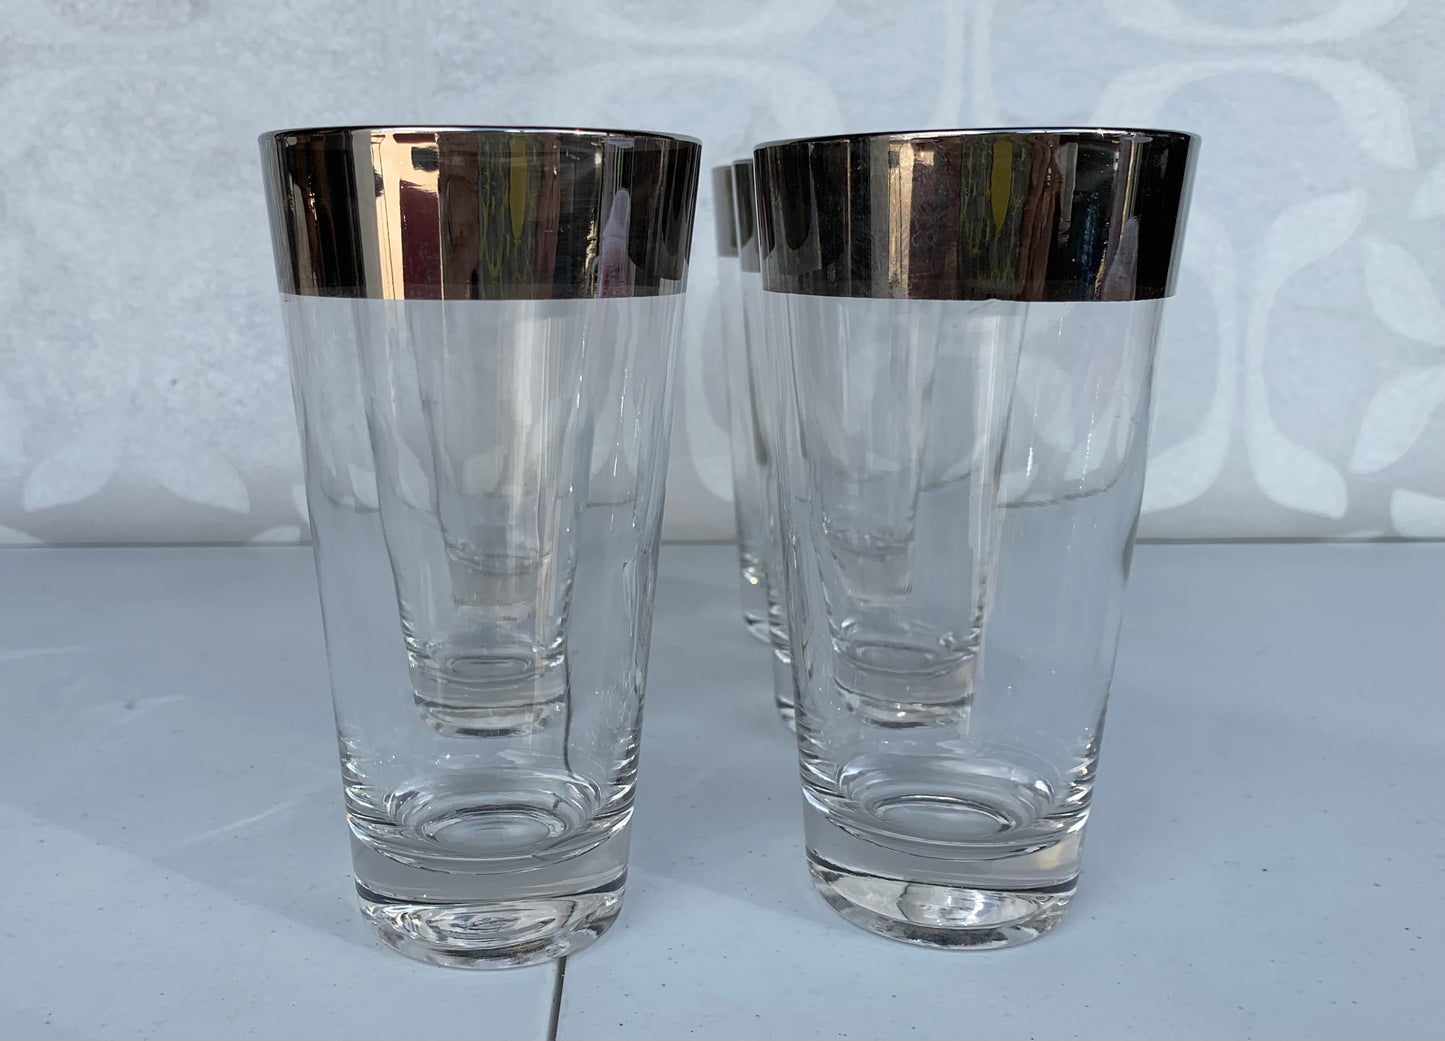 Table Top Vintage Barware Dorothy Thorpe Silver Band Flared Highball Glasses set of 6